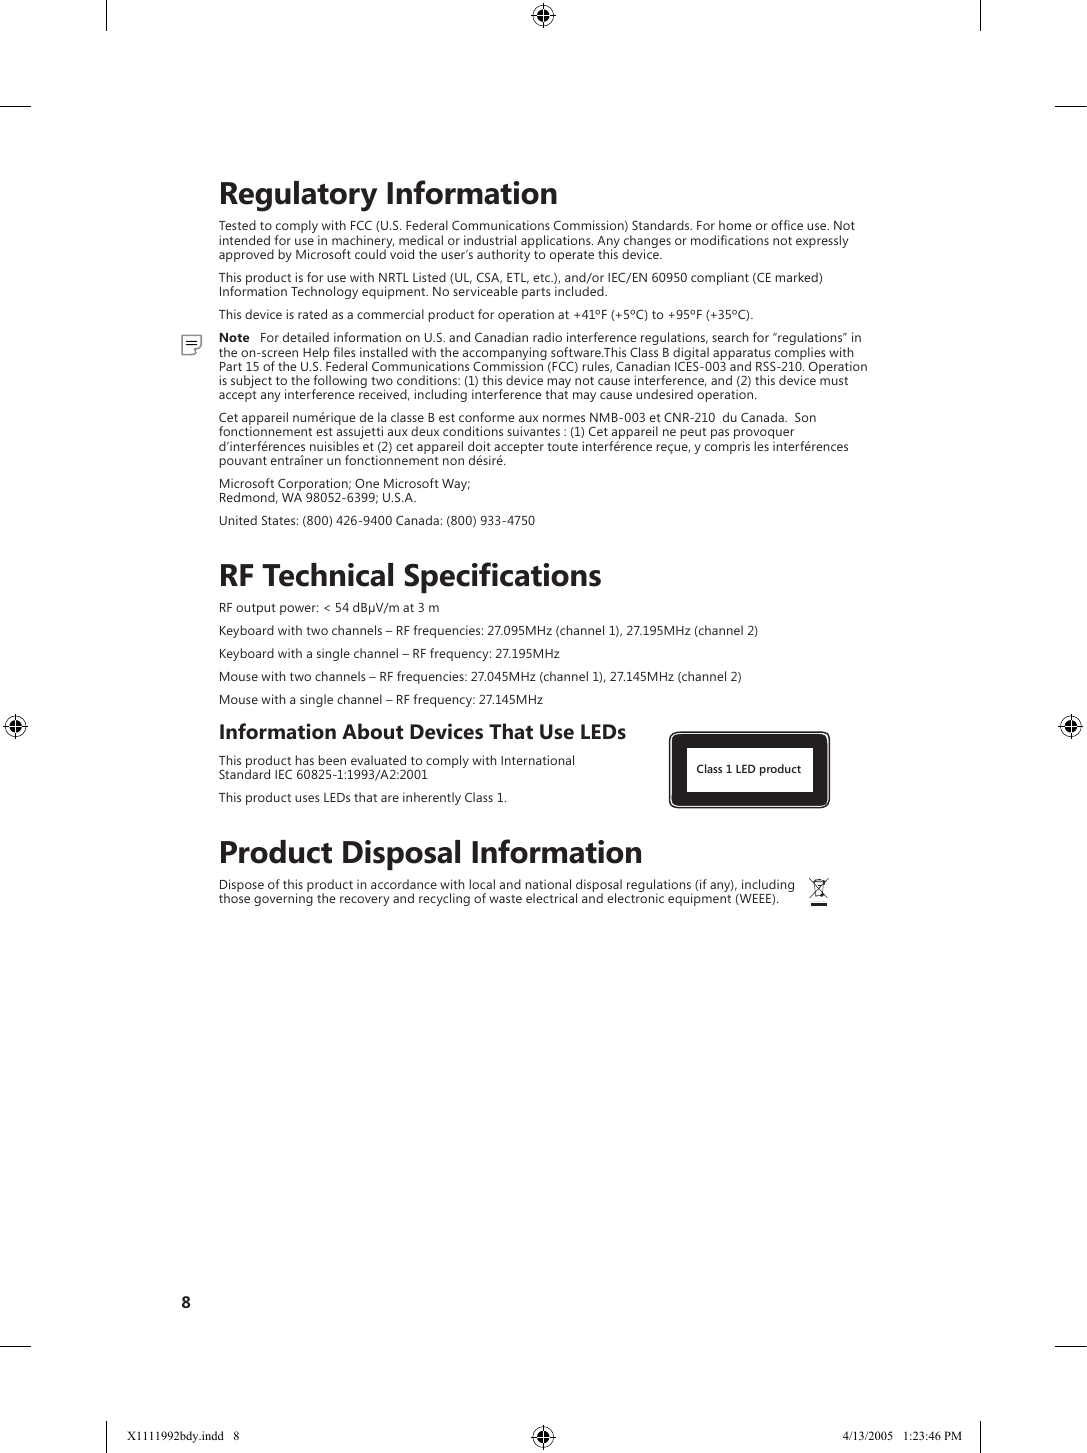 8    Regulatory InformationTested to comply with FCC (U.S. Federal Communications Commission) Standards. For home or ofﬁce use. Not intended for use in machinery, medical or industrial applications. Any changes or modiﬁcations not expressly approved by Microsoft could void the user’s authority to operate this device.This product is for use with NRTL Listed (UL, CSA, ETL, etc.), and/or IEC/EN 60950 compliant (CE marked) Information Technology equipment. No serviceable parts included.This device is rated as a commercial product for operation at +41ºF (+5ºC) to +95ºF (+35ºC).  Note   For detailed information on U.S. and Canadian radio interference regulations, search for “regulations” in the on-screen Help ﬁles installed with the accompanying software.This Class B digital apparatus complies with Part 15 of the U.S. Federal Communications Commission (FCC) rules, Canadian ICES-003 and RSS-210. Operation is subject to the following two conditions: (1) this device may not cause interference, and (2) this device must accept any interference received, including interference that may cause undesired operation.Cet appareil numérique de la classe B est conforme aux normes NMB-003 et CNR-210  du Canada.  Son fonctionnement est assujetti aux deux conditions suivantes : (1) Cet appareil ne peut pas provoquer d’interférences nuisibles et (2) cet appareil doit accepter toute interférence reçue, y compris les interférences pouvant entraîner un fonctionnement non désiré.Microsoft Corporation; One Microsoft Way;  Redmond, WA 98052-6399; U.S.A.United States: (800) 426-9400 Canada: (800) 933-4750    RF Technical SpecificationsRF output power: &lt; 54 dBµV/m at 3 mKeyboard with two channels – RF frequencies: 27.095MHz (channel 1), 27.195MHz (channel 2)Keyboard with a single channel – RF frequency: 27.195MHzMouse with two channels – RF frequencies: 27.045MHz (channel 1), 27.145MHz (channel 2)Mouse with a single channel – RF frequency: 27.145MHzInformation About Devices That Use LEDsThis product has been evaluated to comply with International     Class 1 LED product  Standard IEC 60825-1:1993/A2:2001This product uses LEDs that are inherently Class 1.    Product Disposal InformationDispose of this product in accordance with local and national disposal regulations (if any), including      those governing the recovery and recycling of waste electrical and electronic equipment (WEEE).X1111992bdy.indd   8 4/13/2005   1:23:46 PM